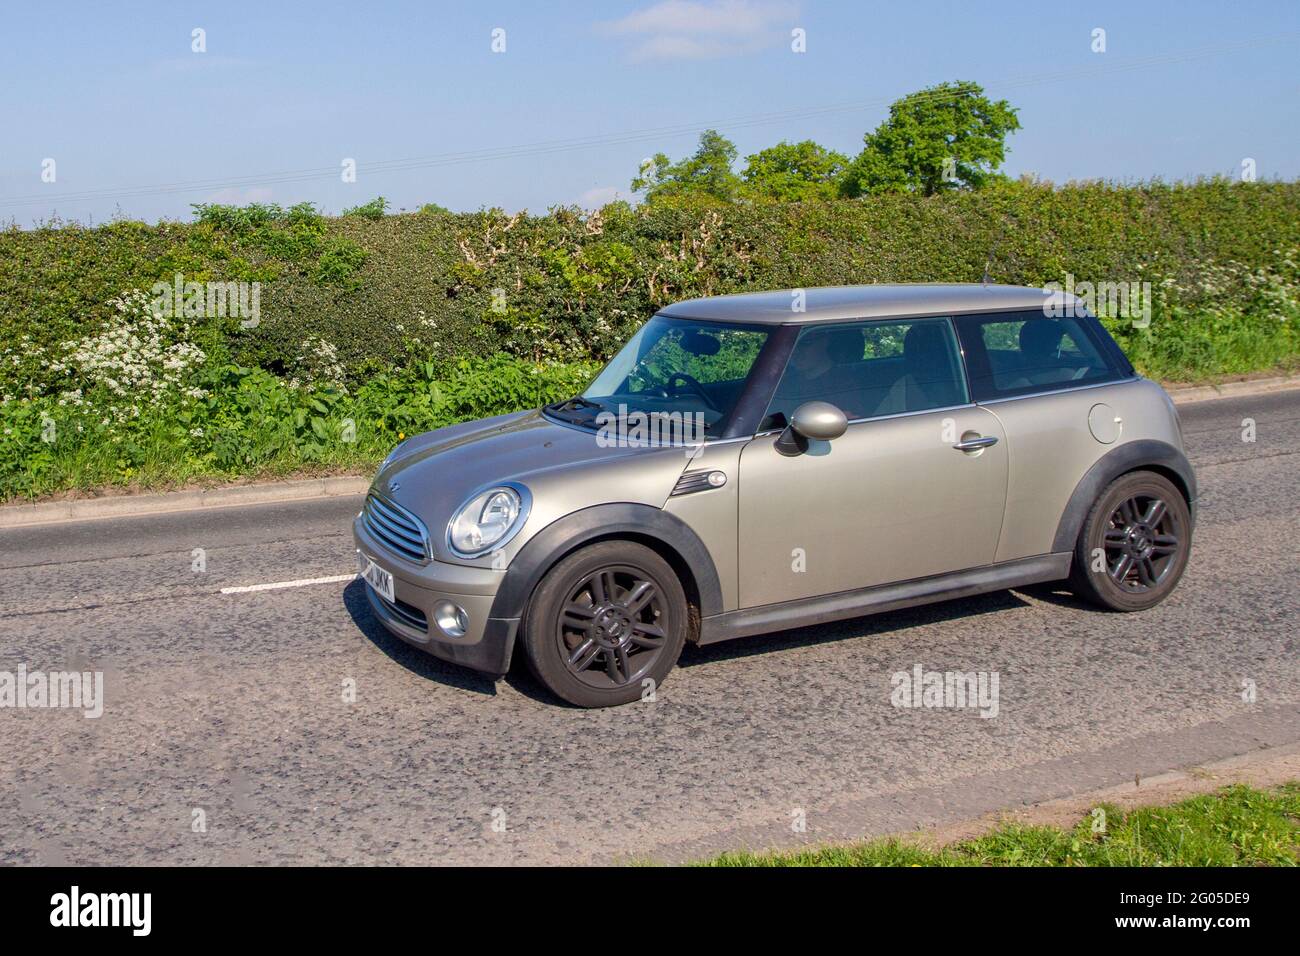 2010 Mini One Silver 1598cc petrol hatchback 2dr, Vehicular traffic, moving vehicles, cars, vehicle driving on UK roads, motors, motoring on the M6 motorway highway UK road network. Stock Photo